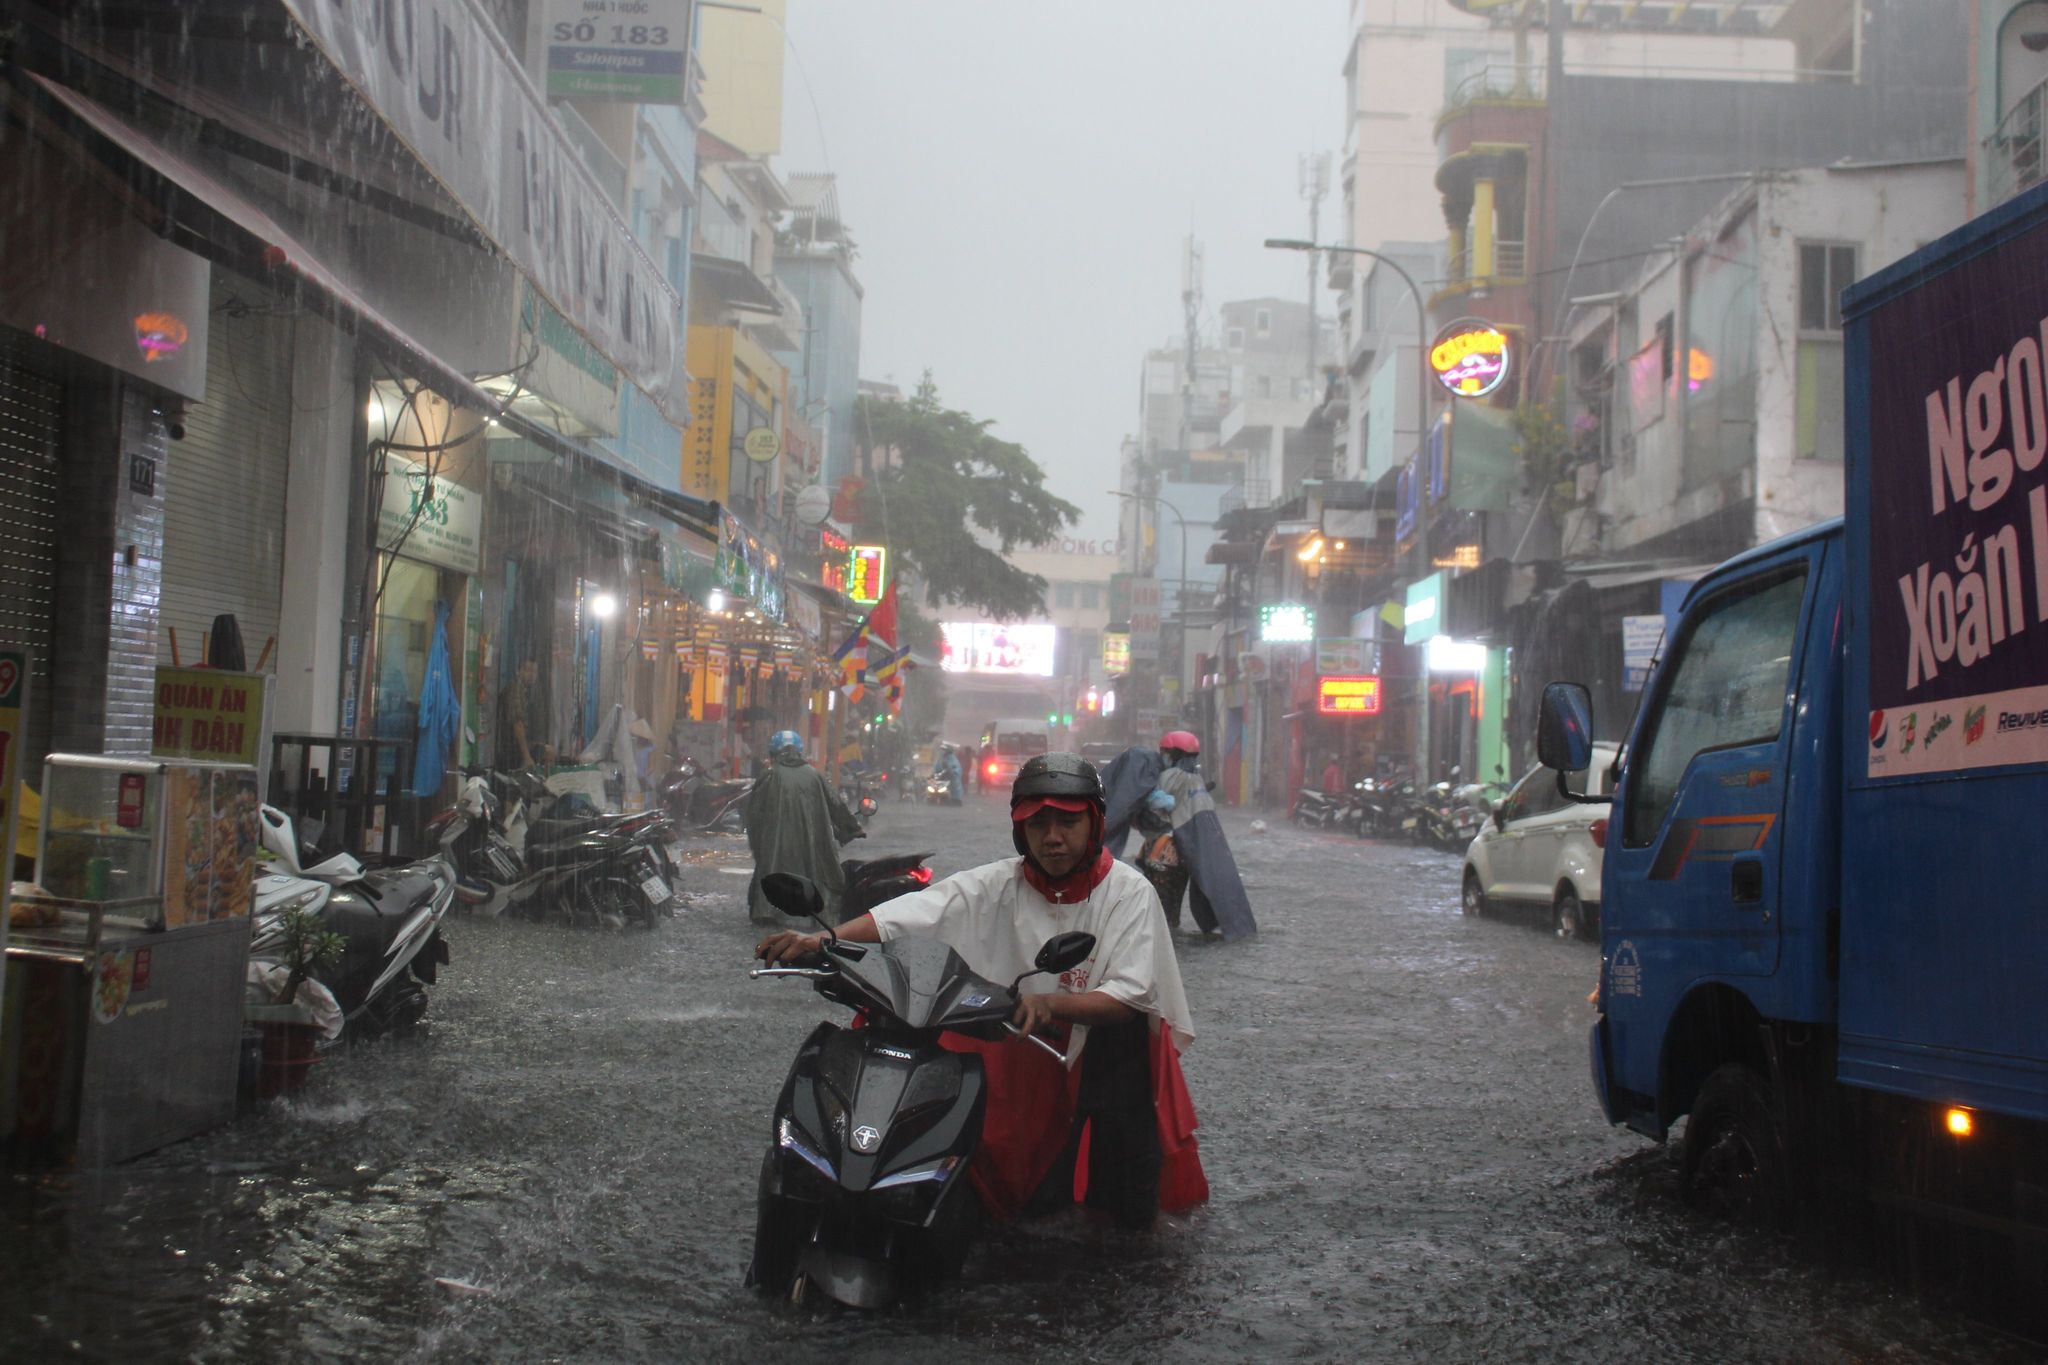 Bui Vien Street in District 1, Ho Chi Minh City is inundated, August 15, 2022. Photo: Luu Duyen / Tuoi Tre